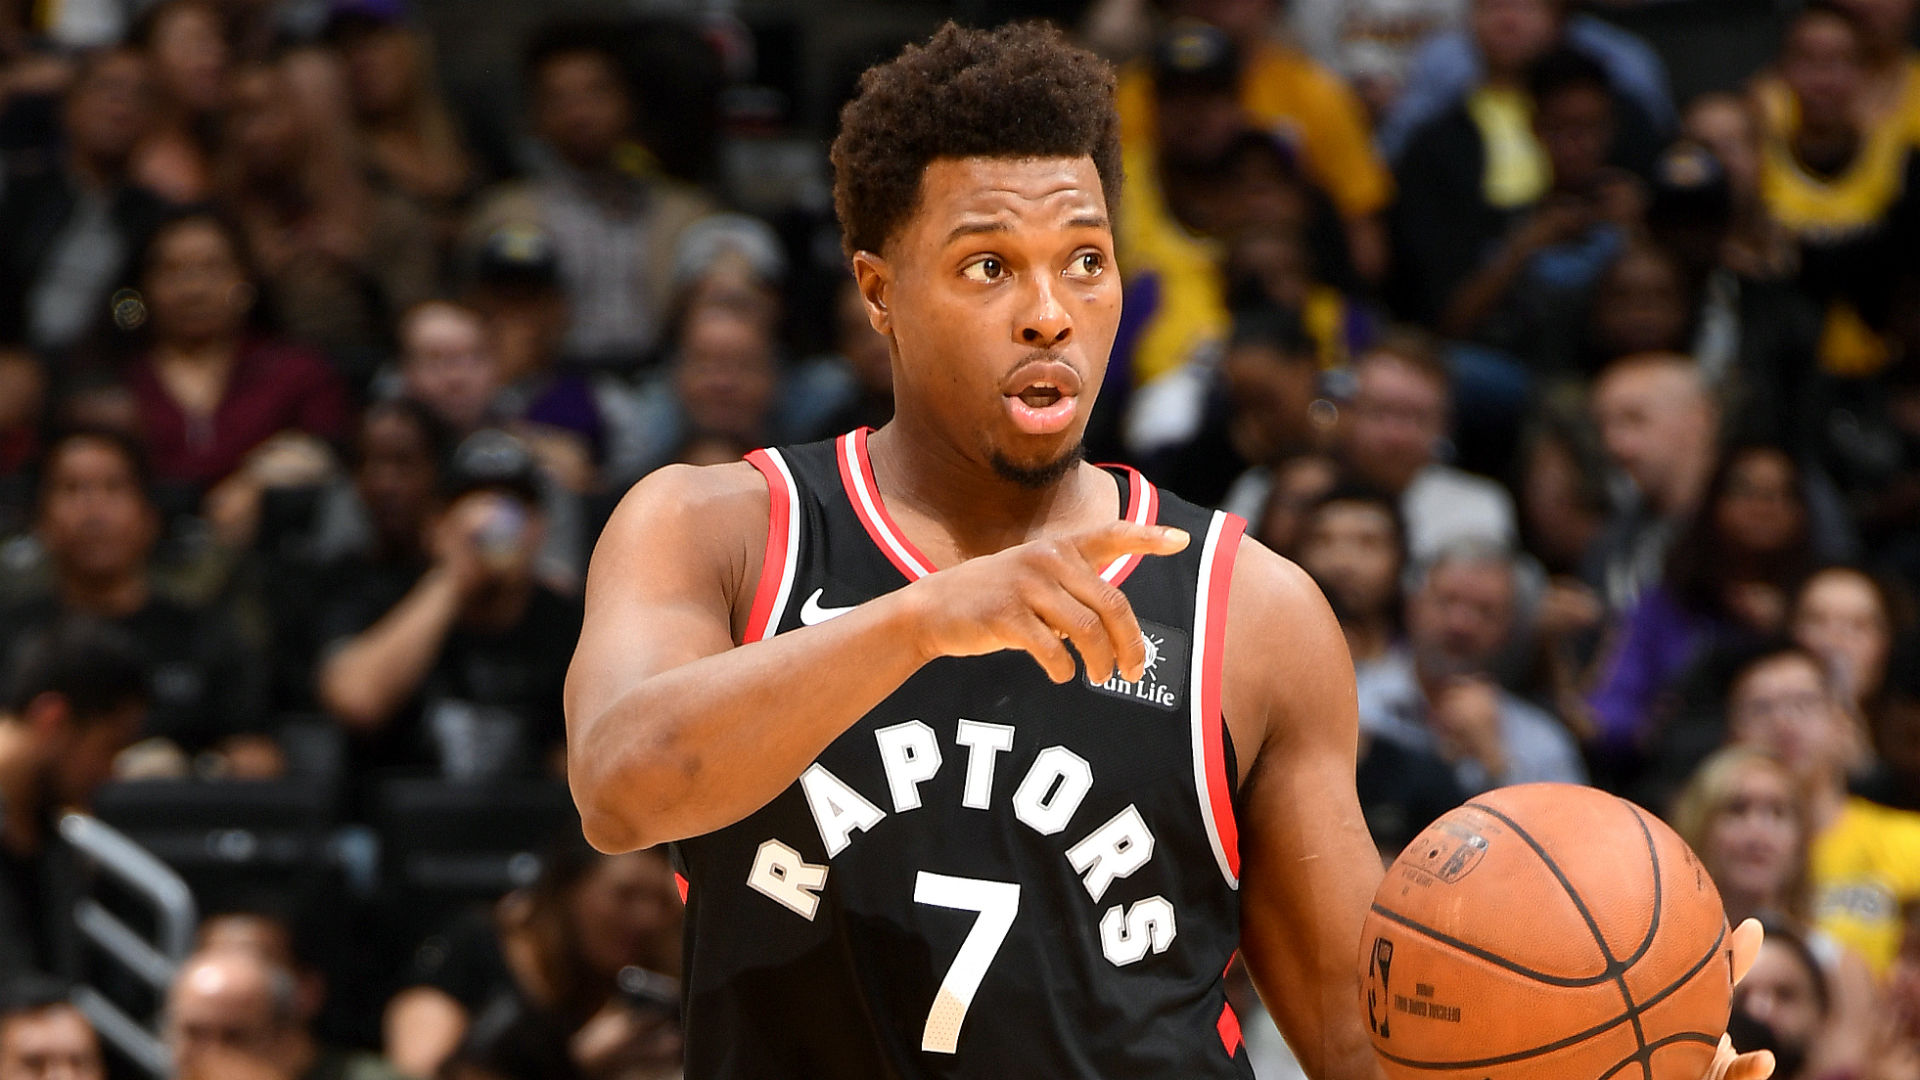 The five stats you need to know about Kyle Lowry's incredible start to